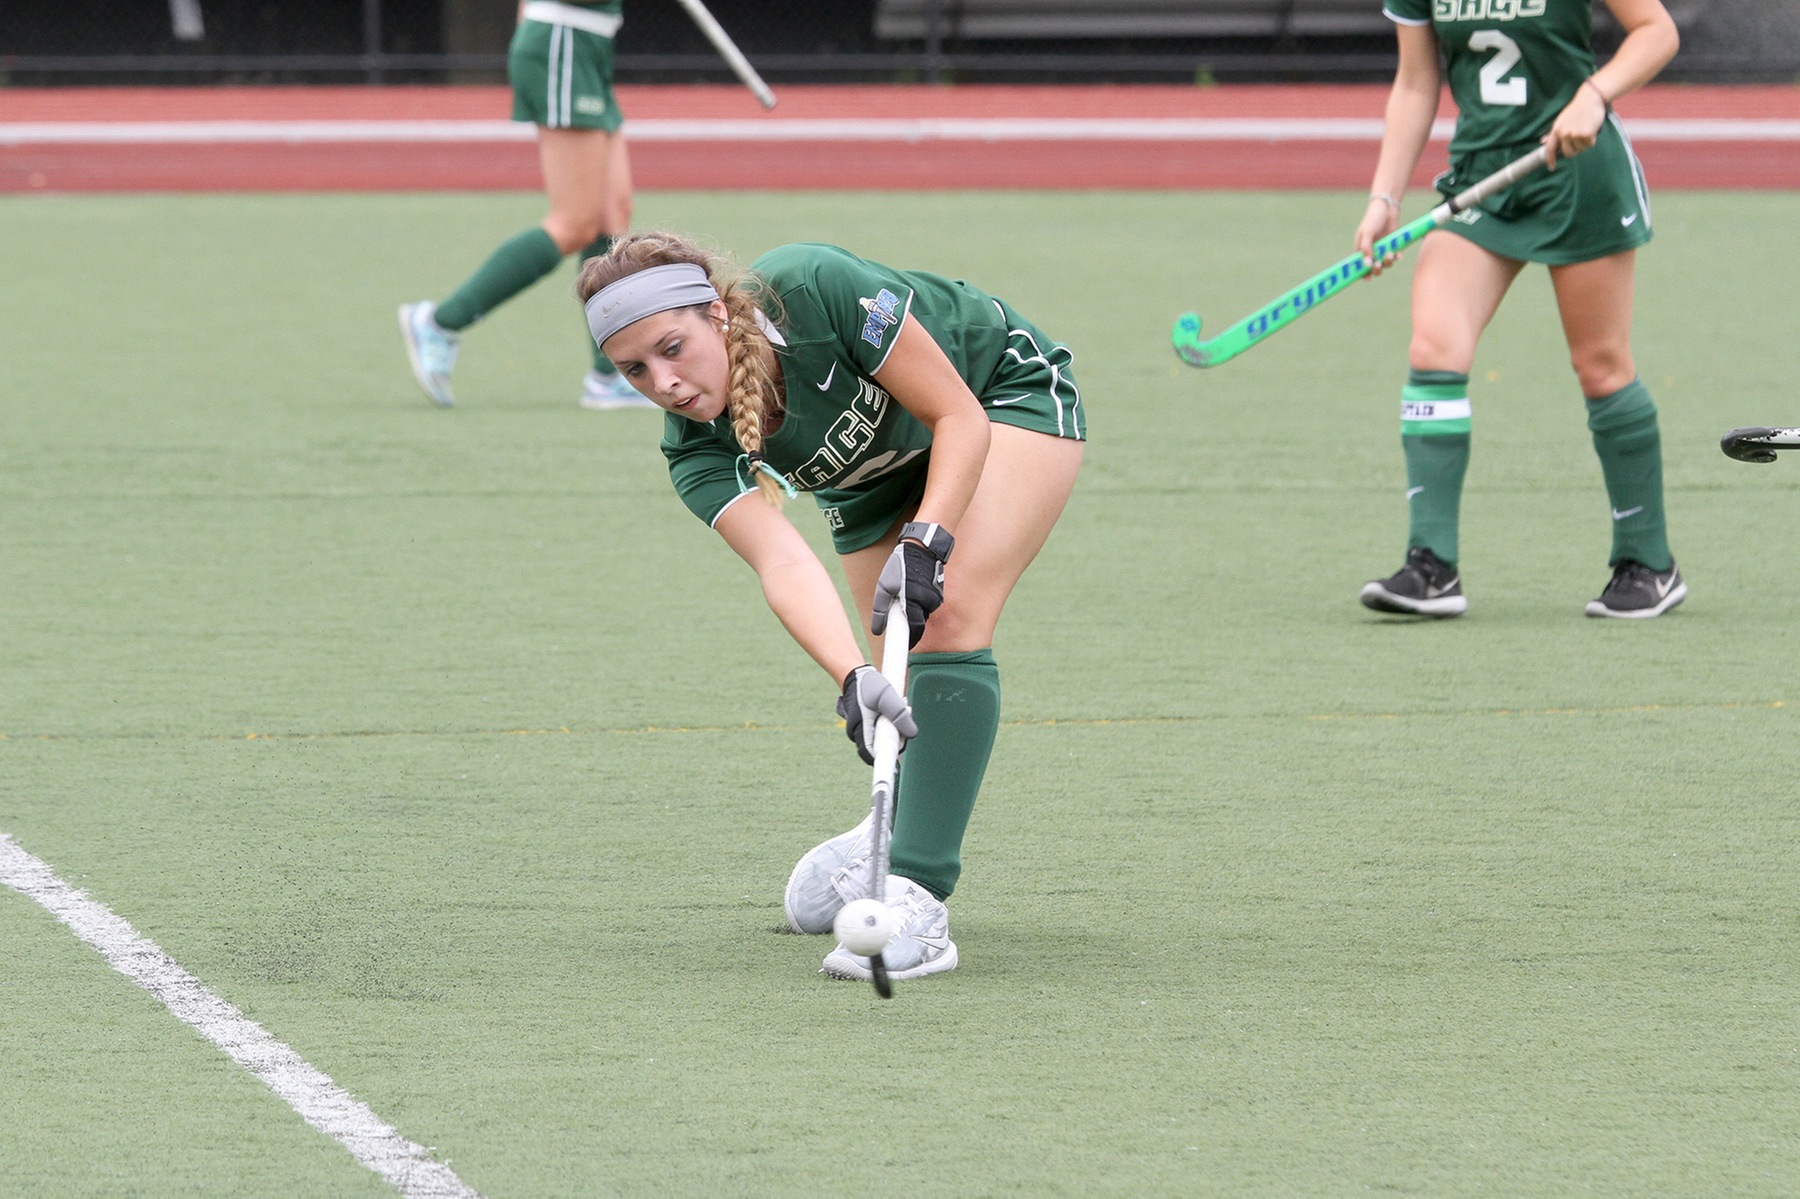 Gators fall on opening day to Westfield State in first field hockey match